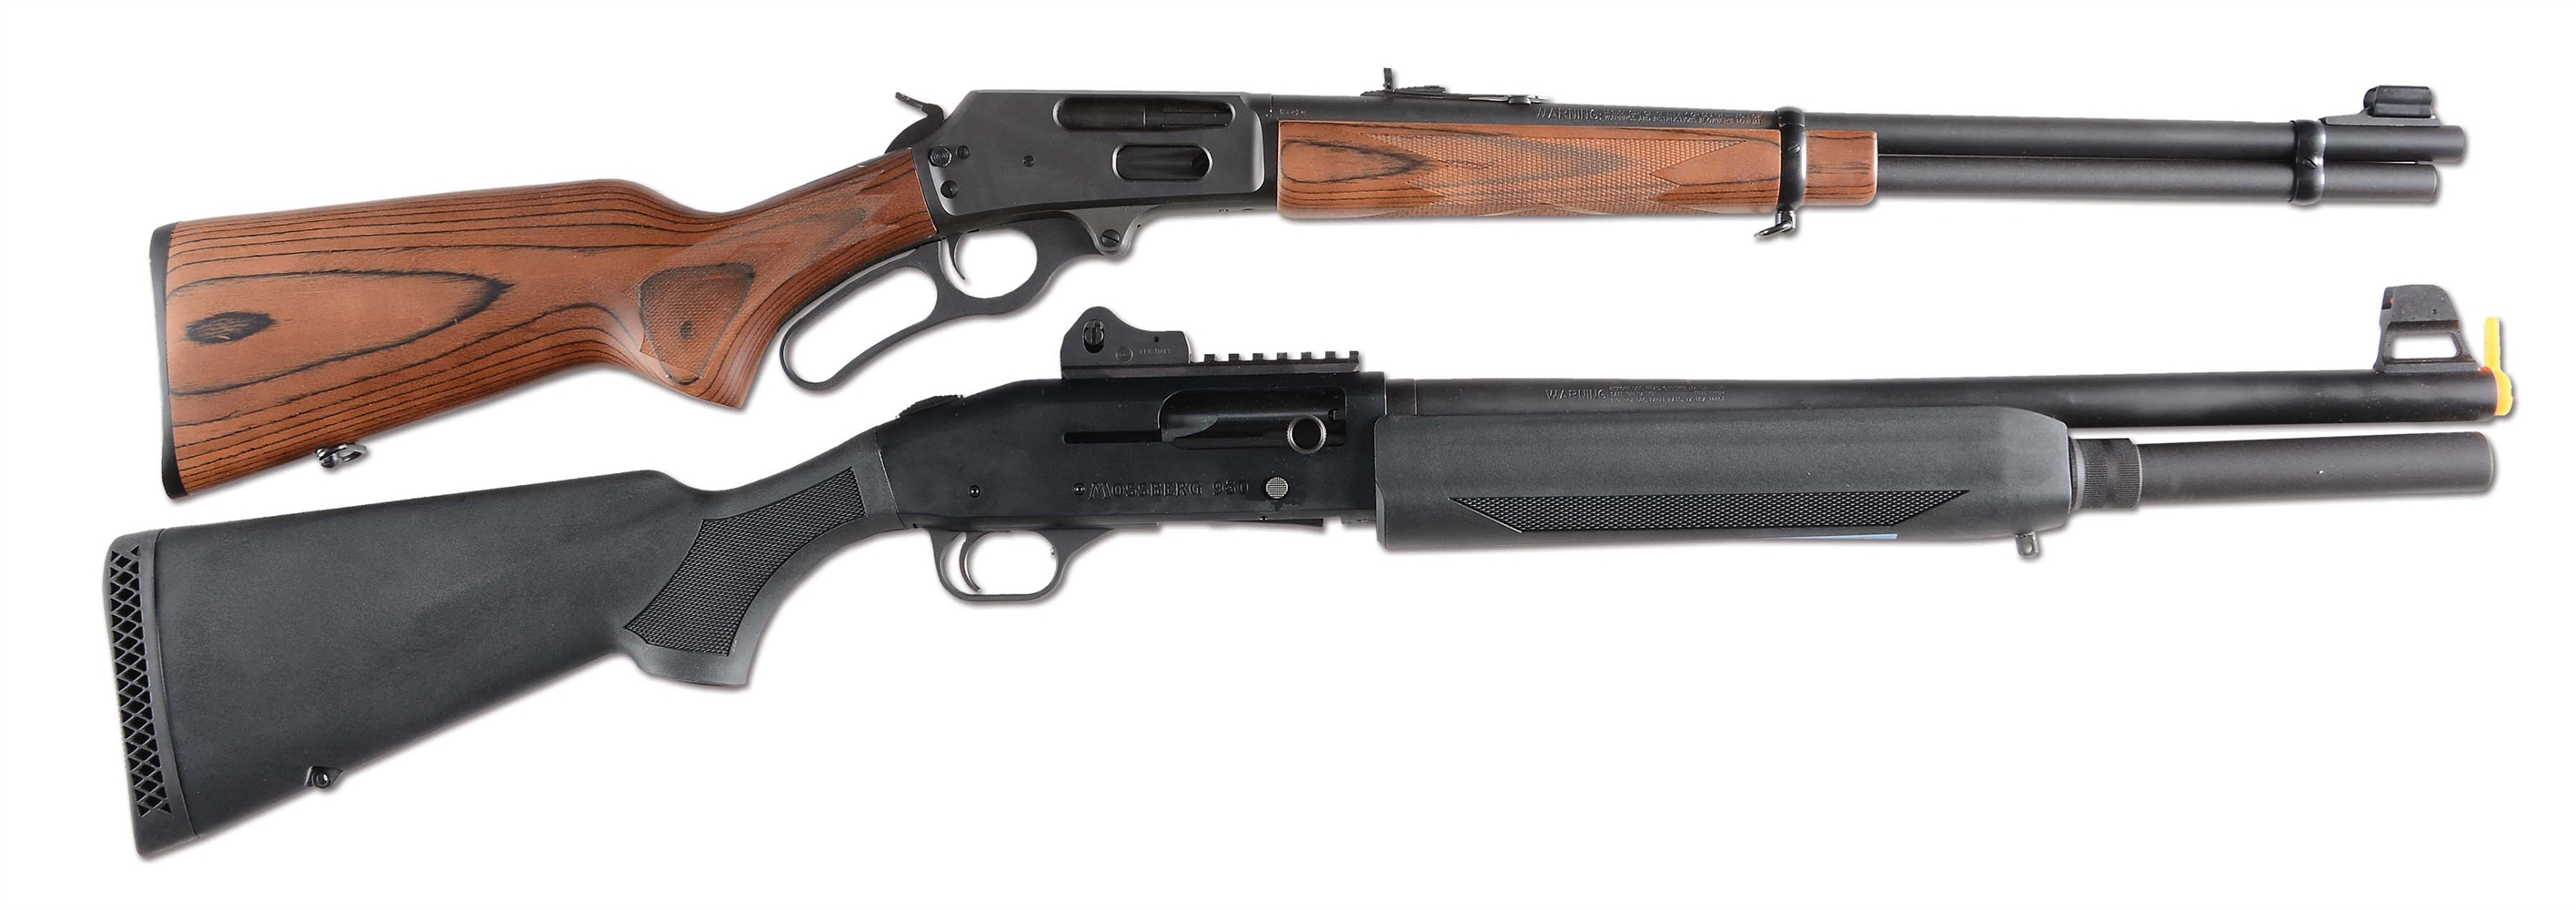 (M) LOT OF 2: MOSSBERG SEMI-AUTOMATIC SHOTGUN AND A MARLIN LEVER ACTION RIFLE.